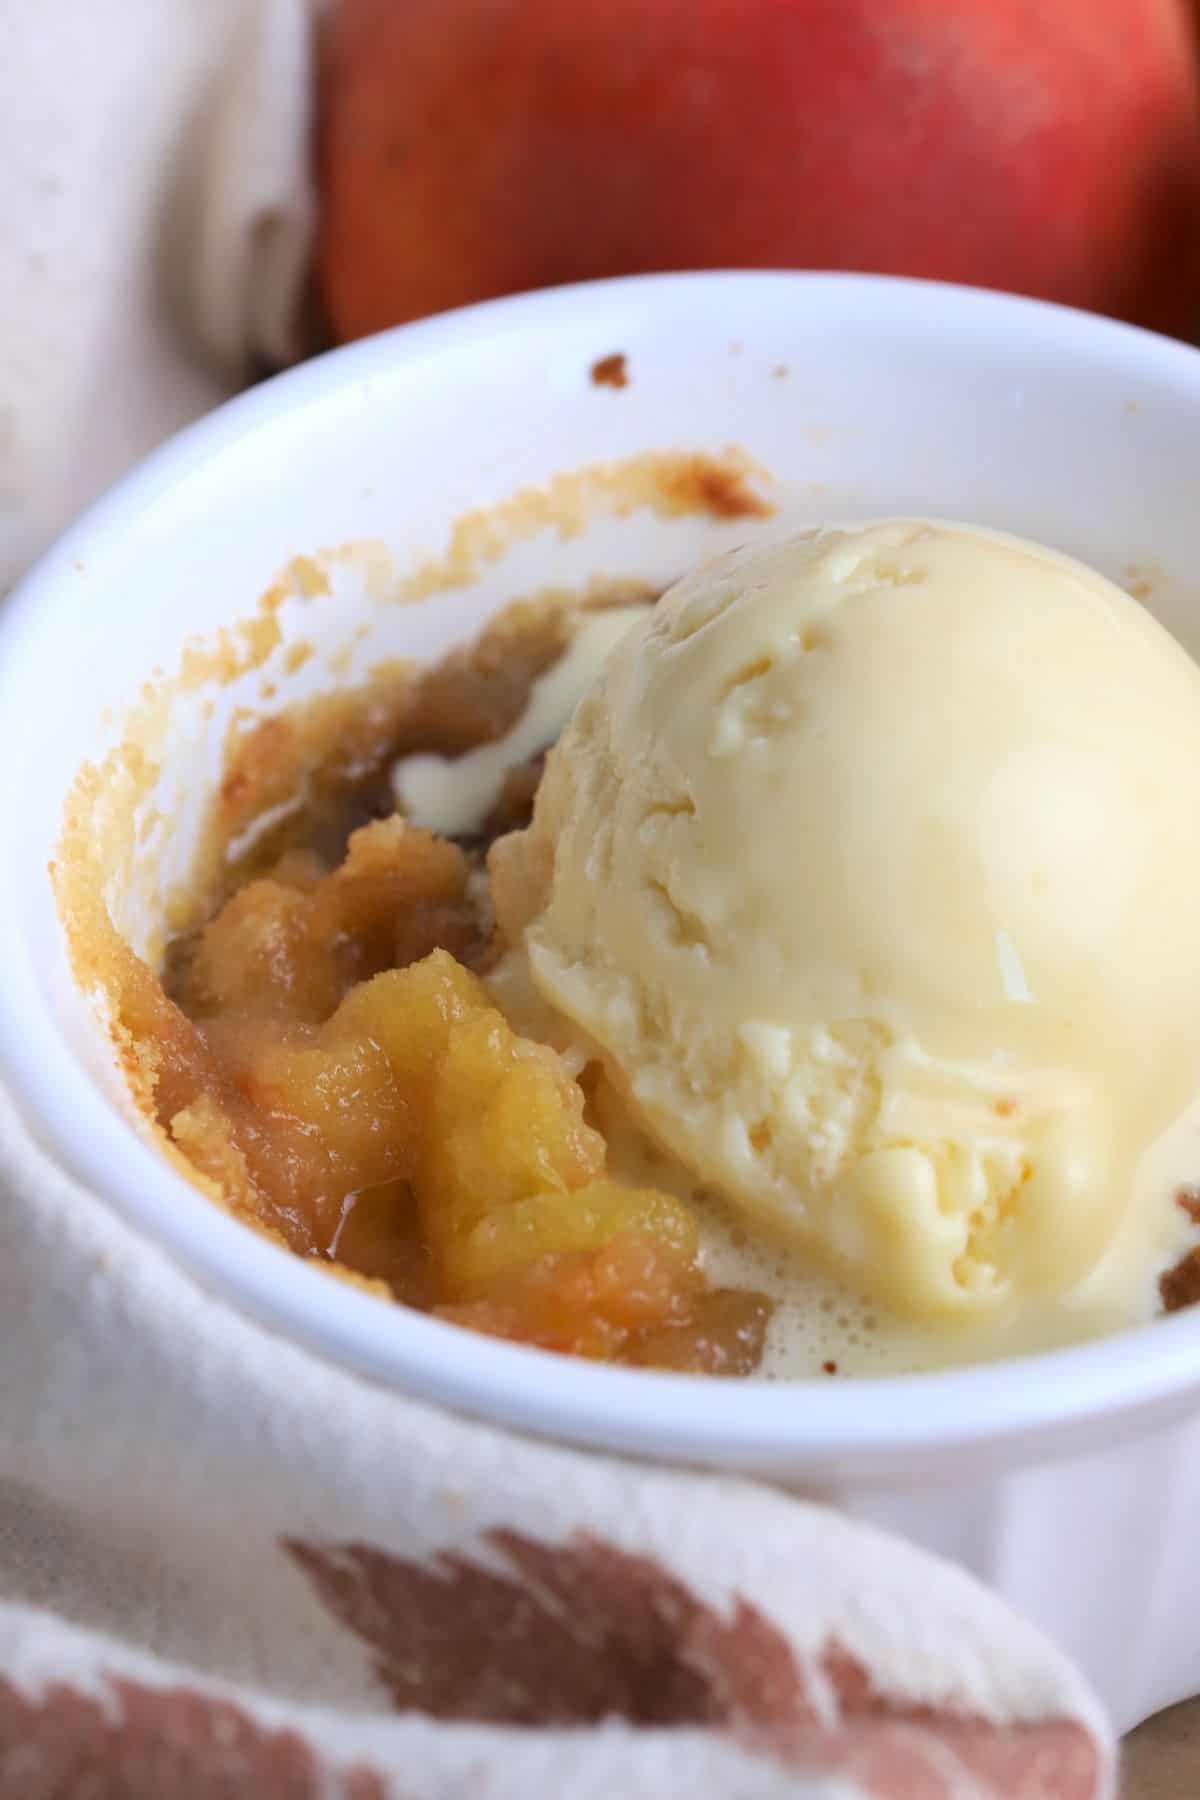 Close up of a peach cobbler in a ramekin dish topped with a scoop of vanilla ice cream.